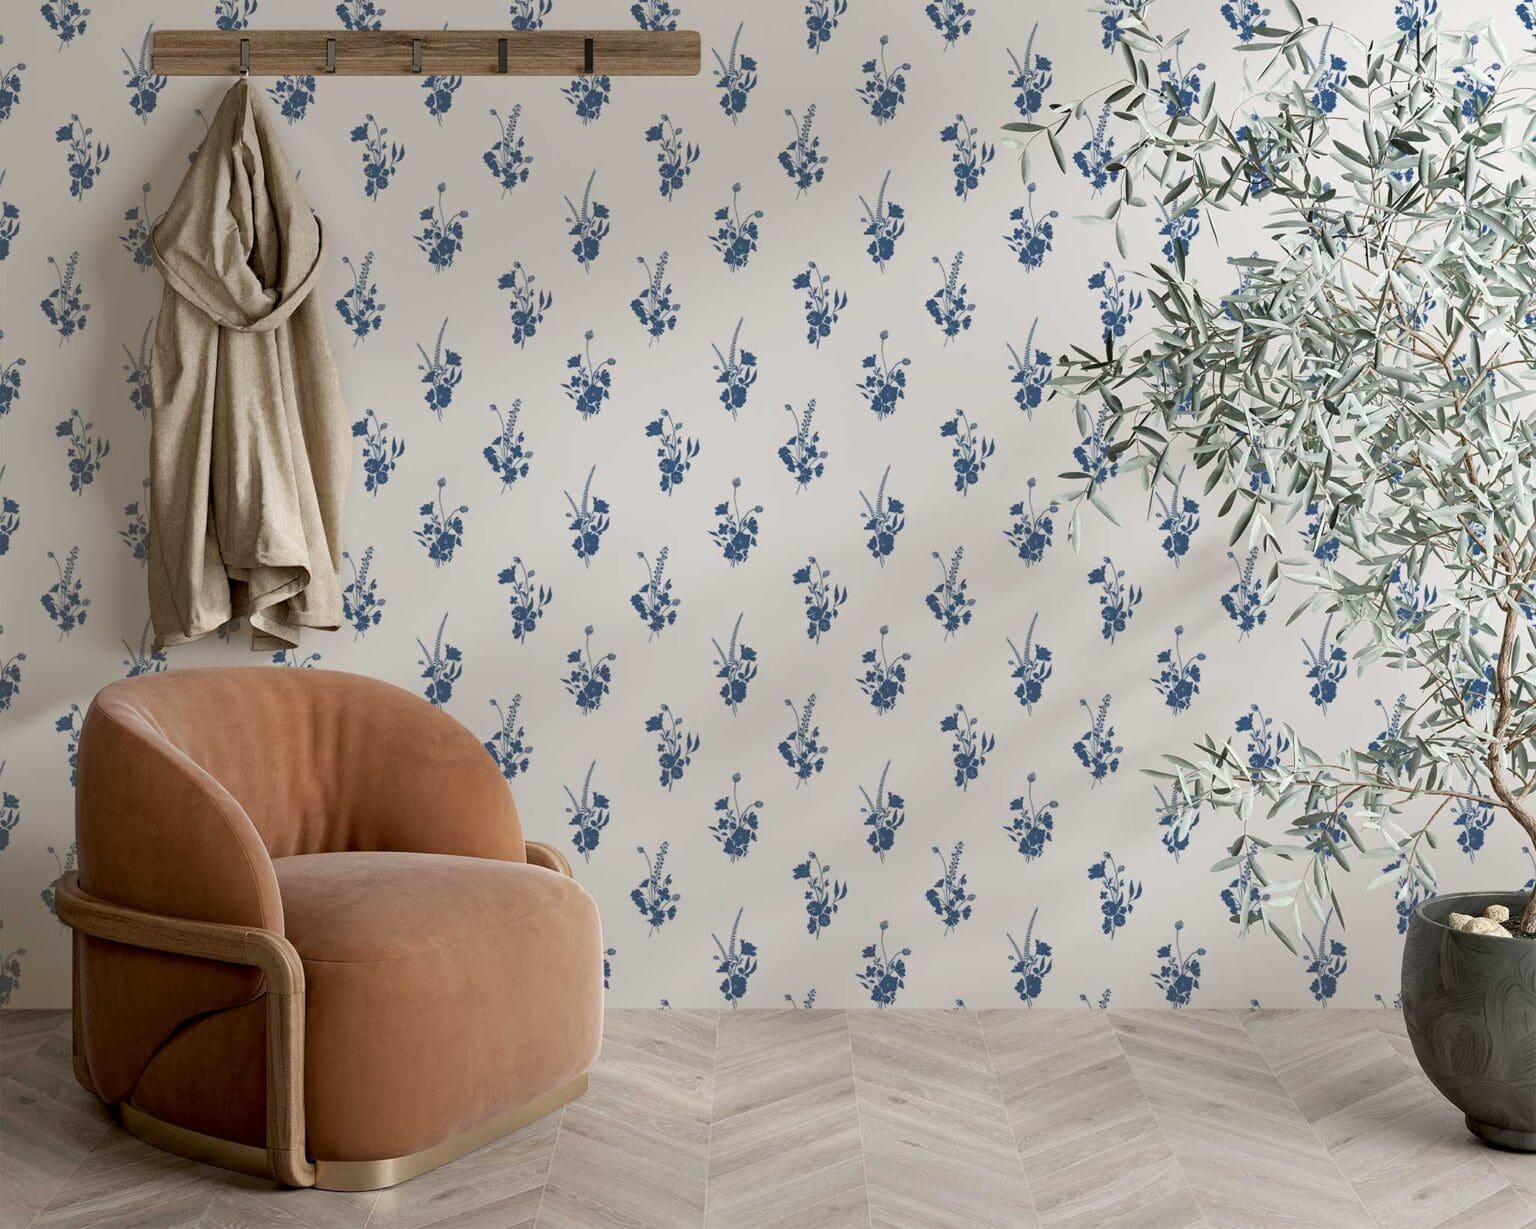 Wall with indigo floral wallpaper with an orange chair and a potted tree in front